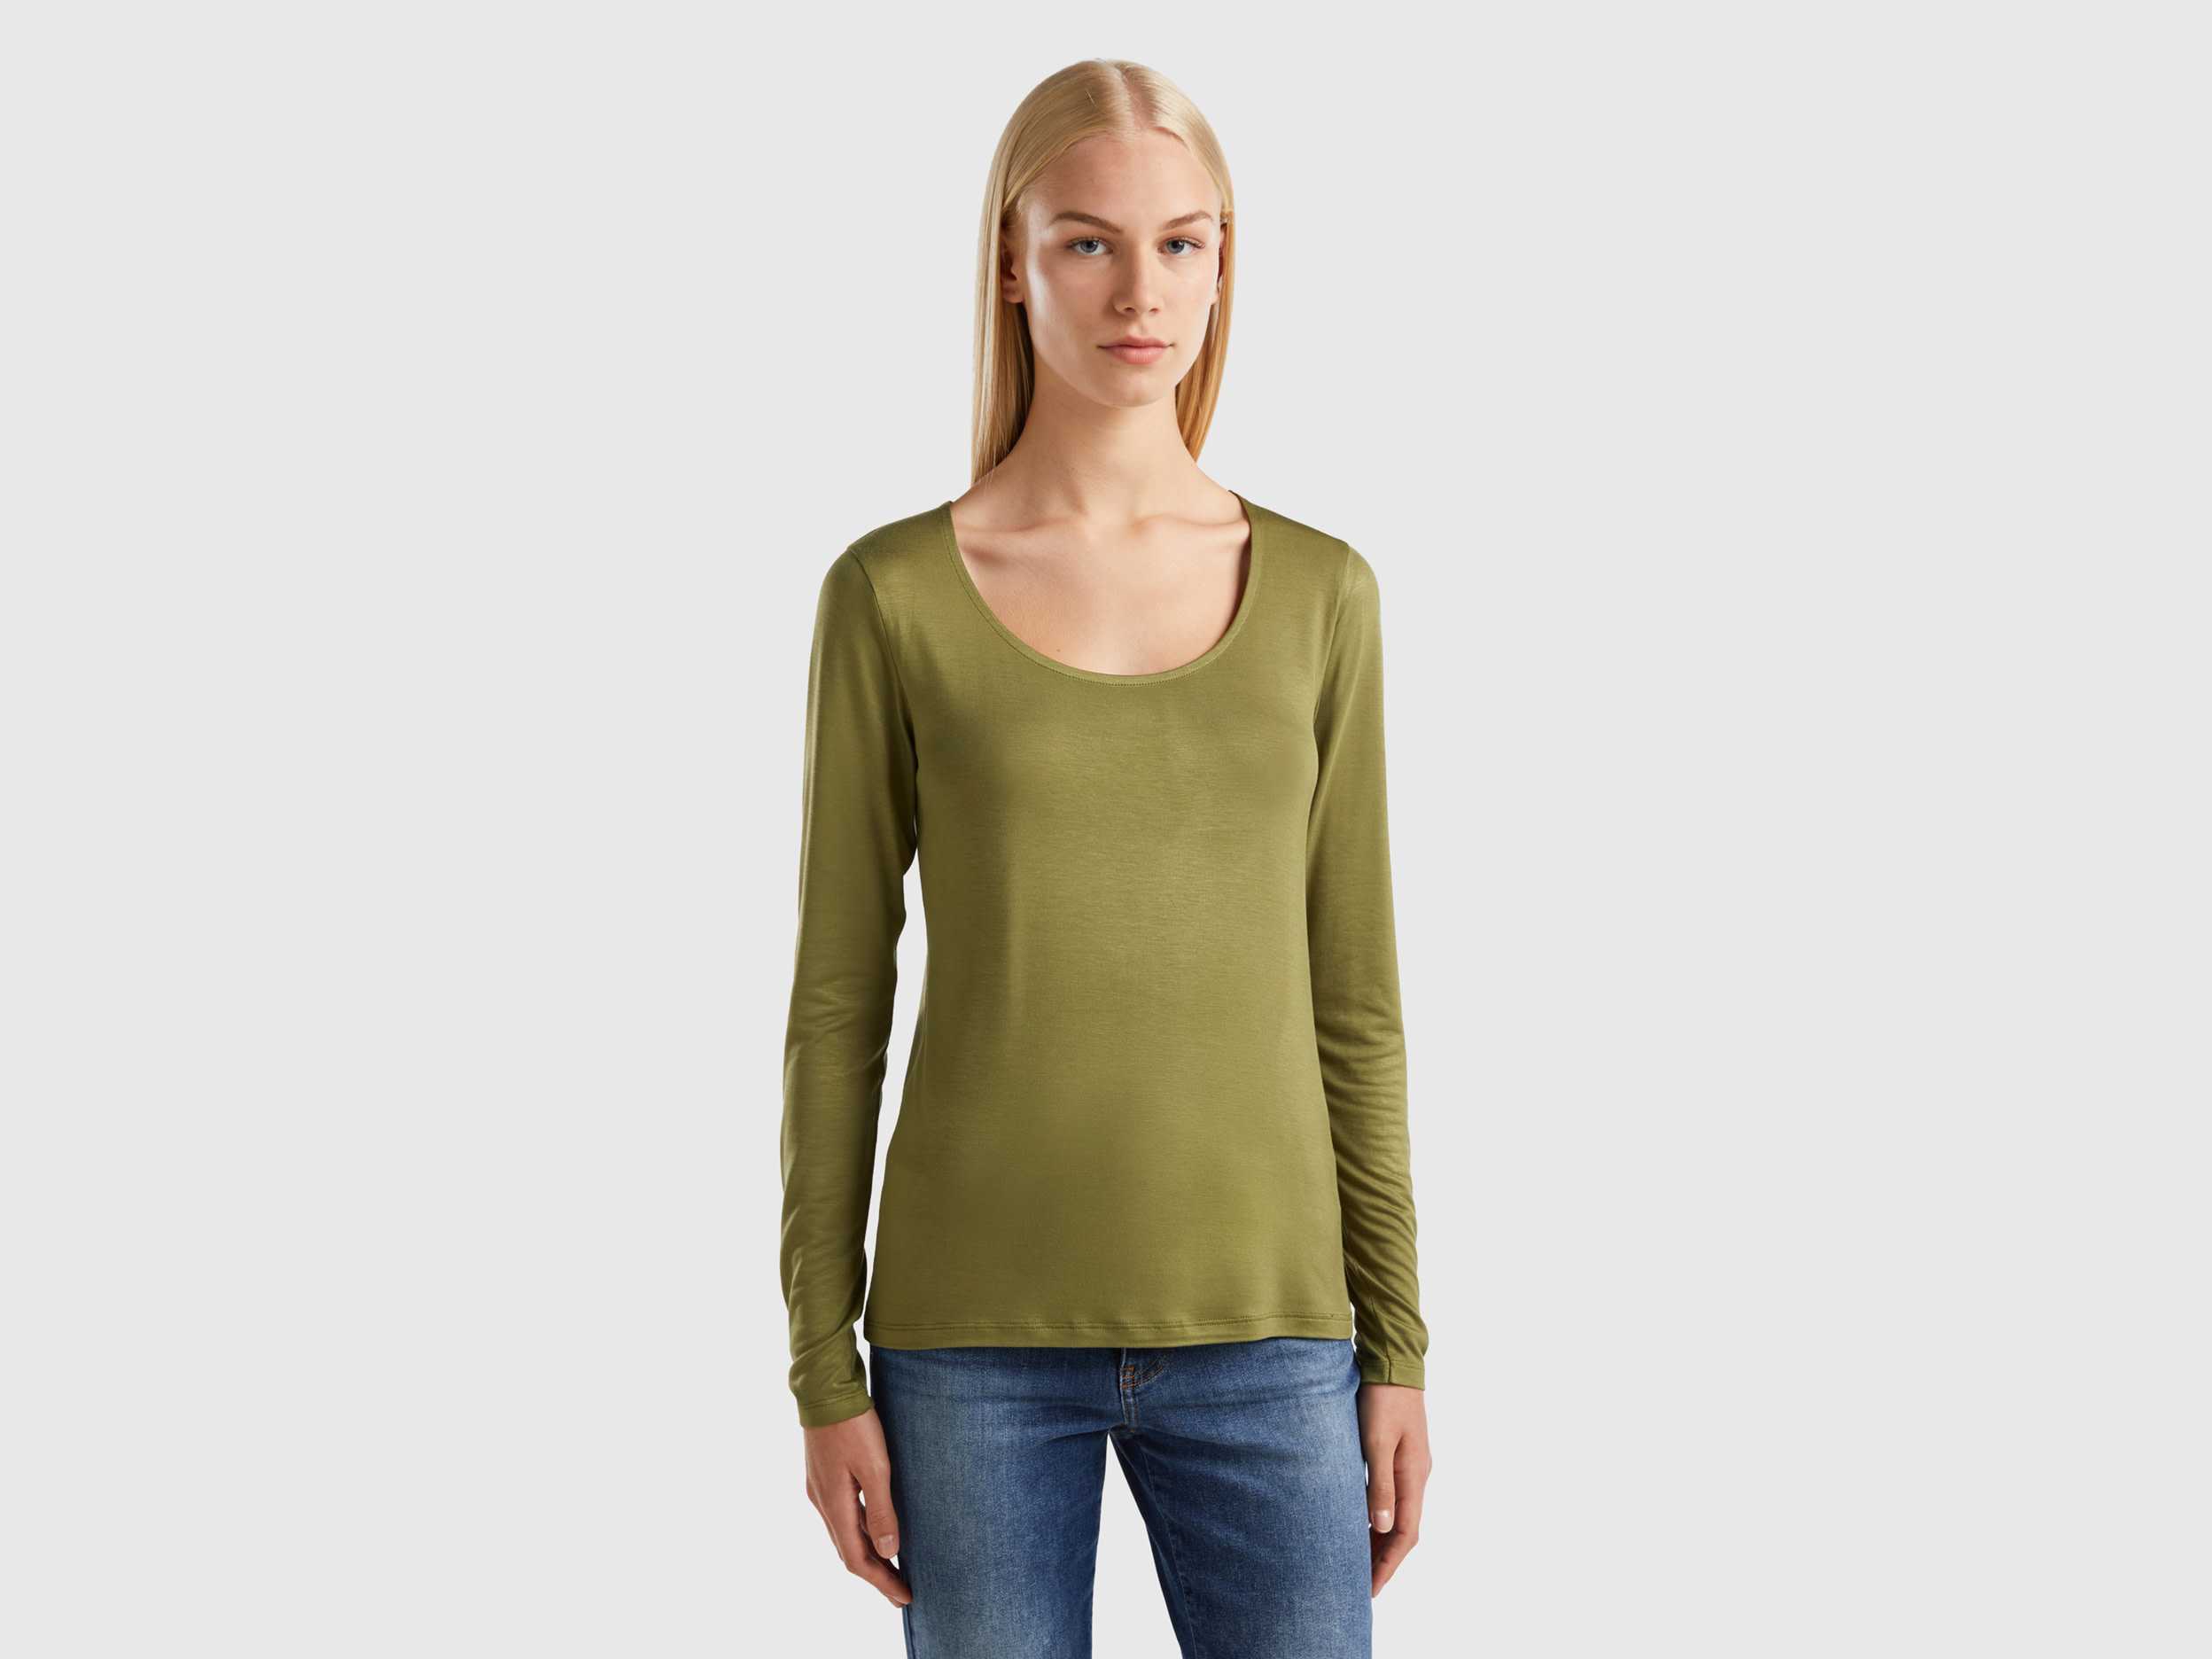 Benetton, T-shirt In Sustainable Stretch Viscose, size XL, Military Green, Women